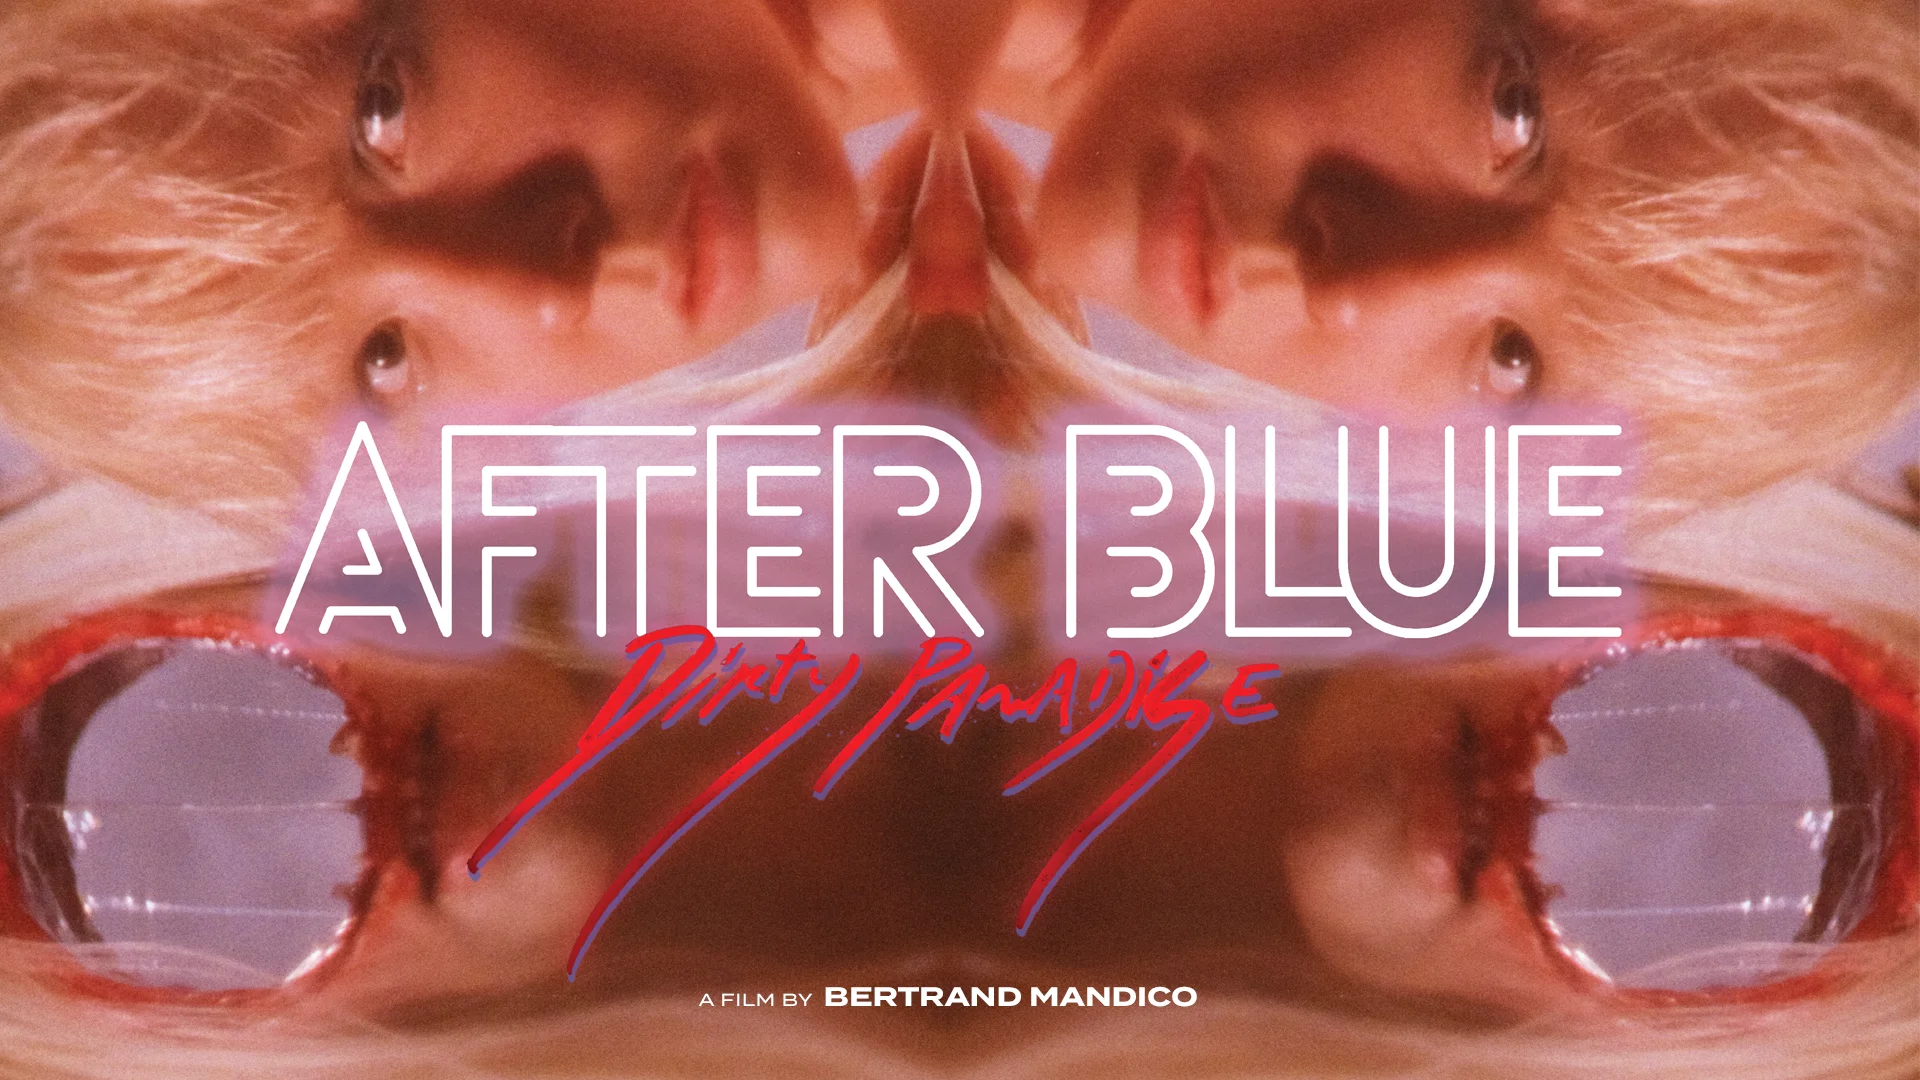 AFTER BLUE (DIRTY PARADISE) - American Cinematheque